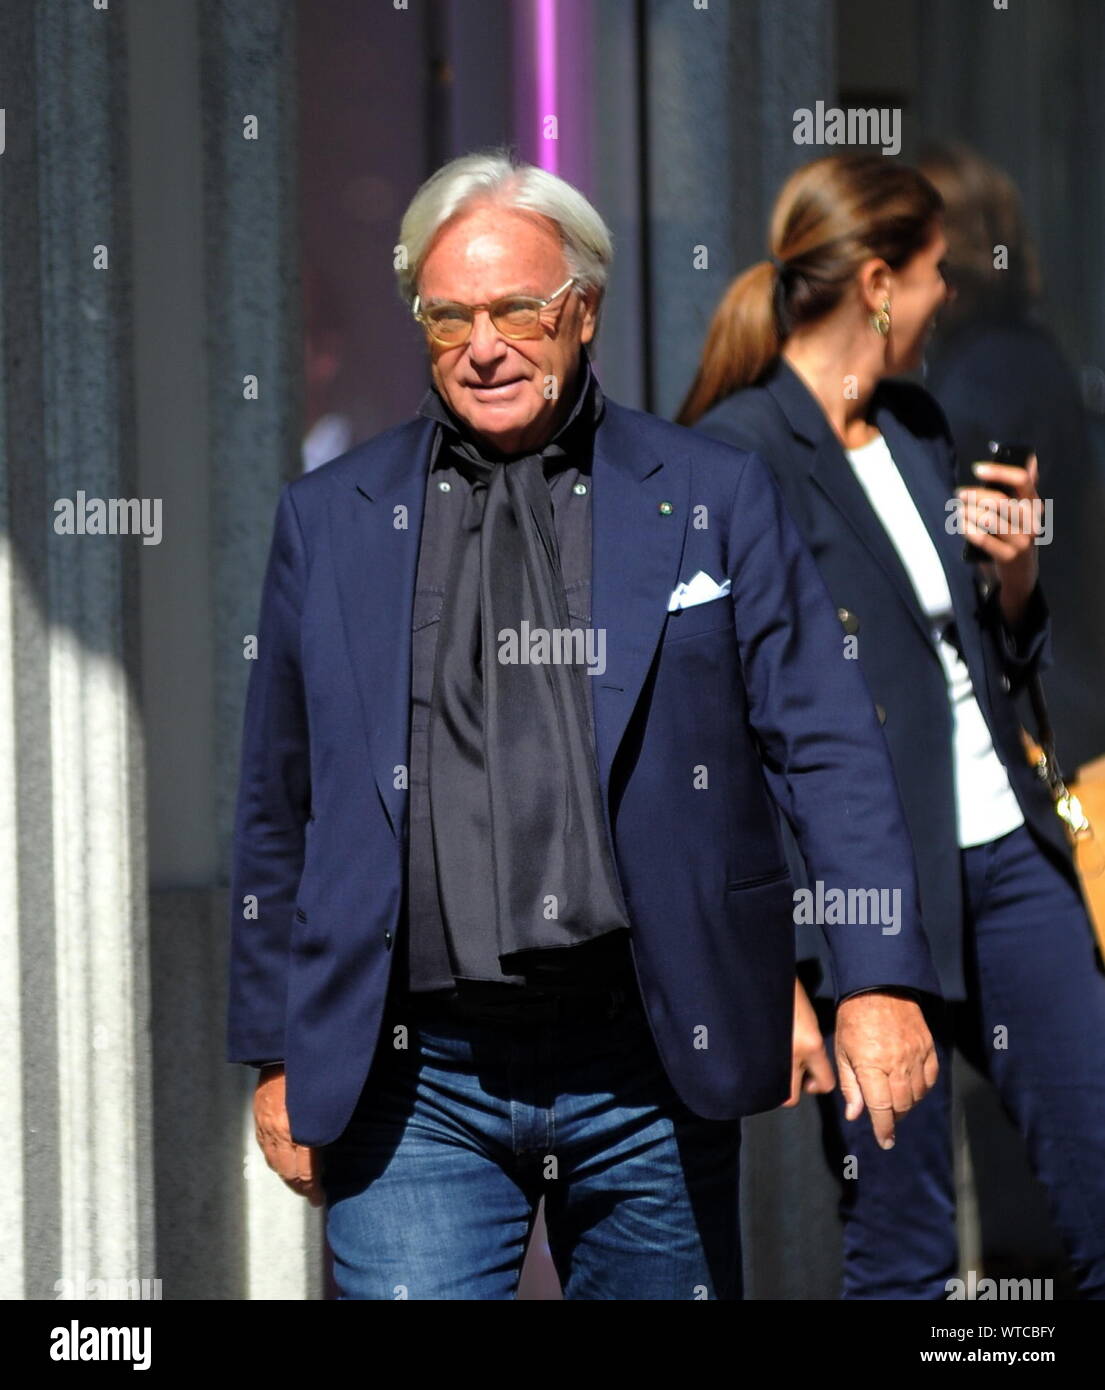 Milan, Diego Della Valle in the center The patron of Tod's, former  President of Fiorentina, DIEGO DELLA VALLE walks through the downtown  streets with friends, then after a stop at the Marchesi